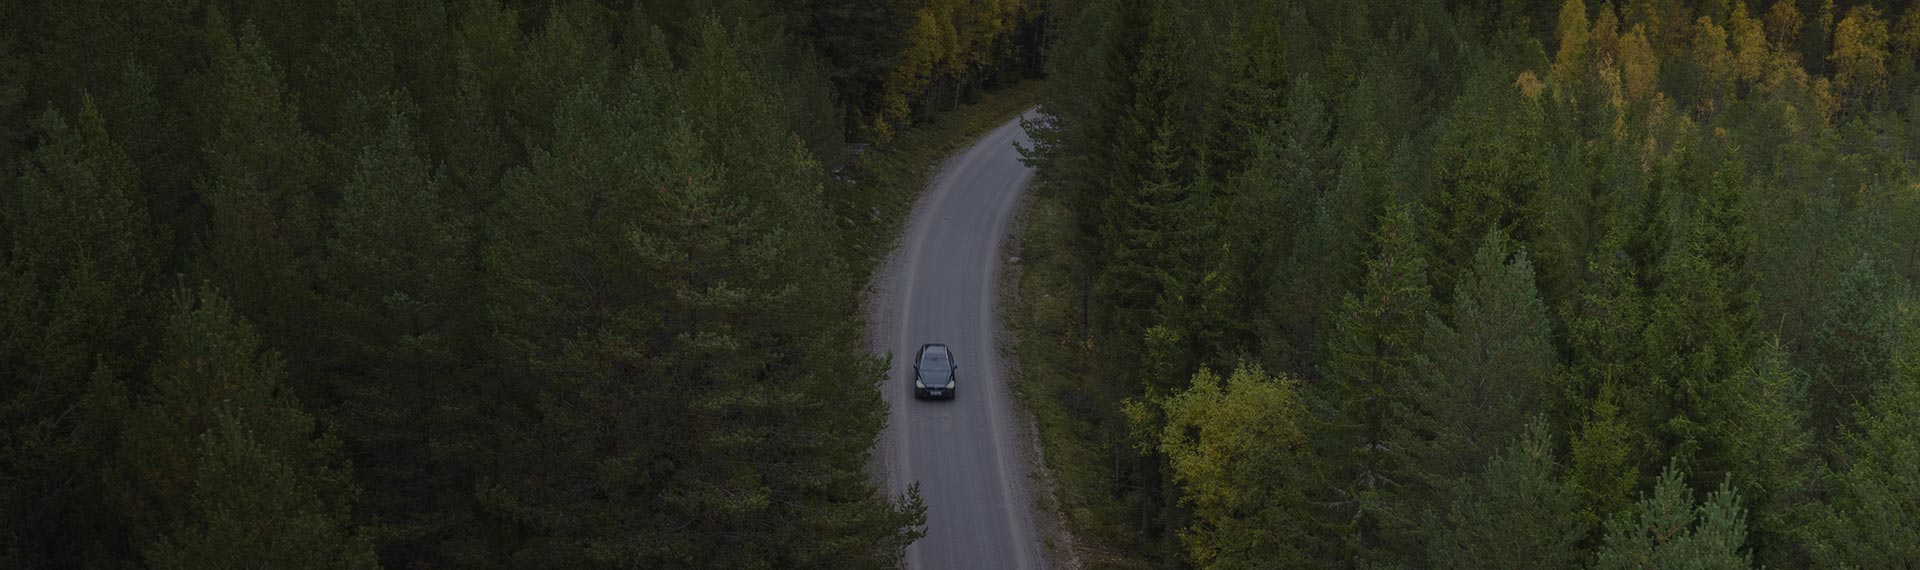 Car driving on a road in the forest